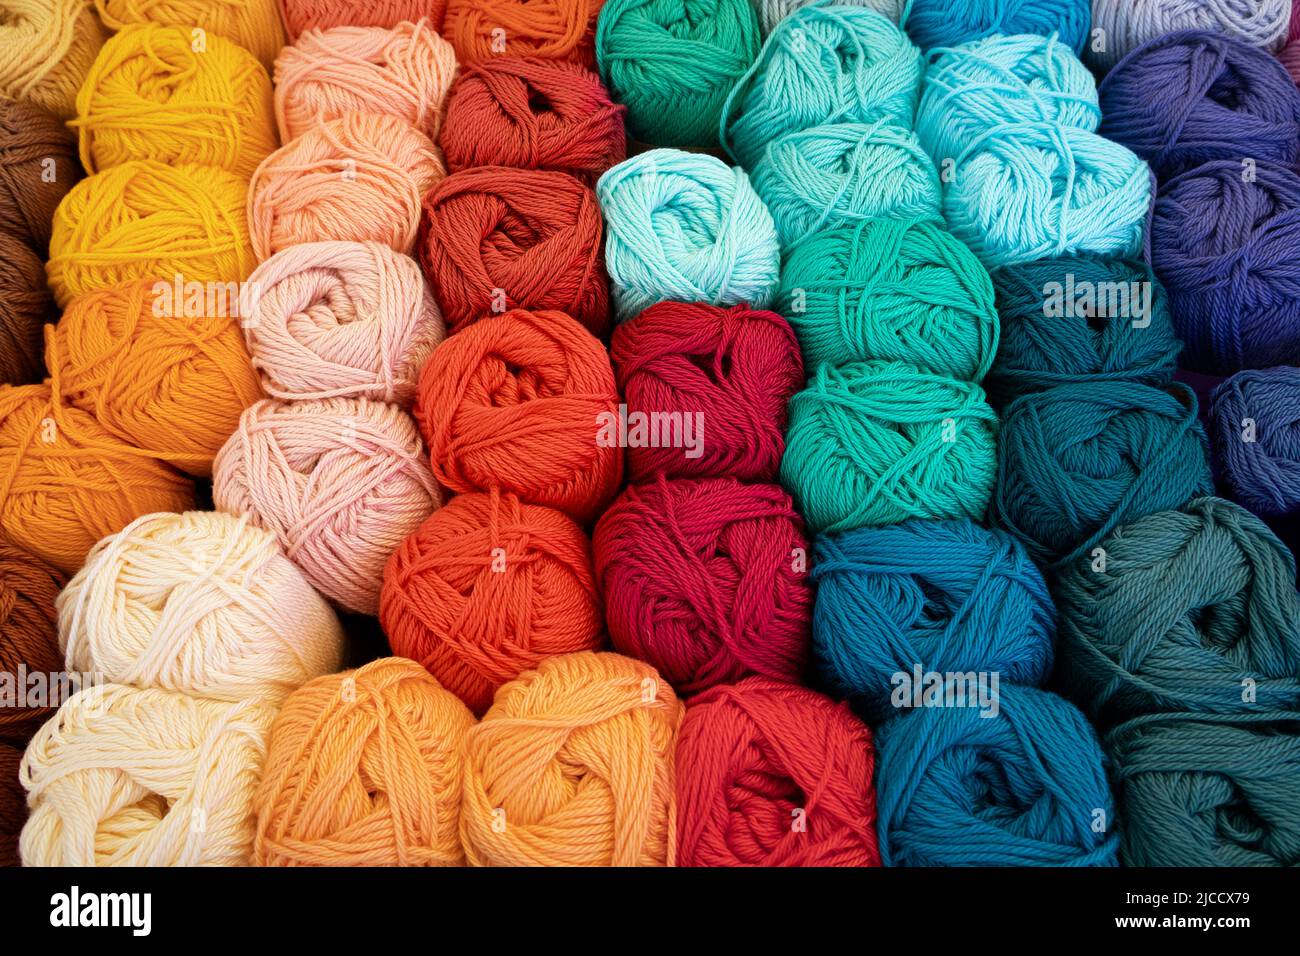 Colorful variation of woolen knitting balls, wool knots, close up full frame as background Stock Photo